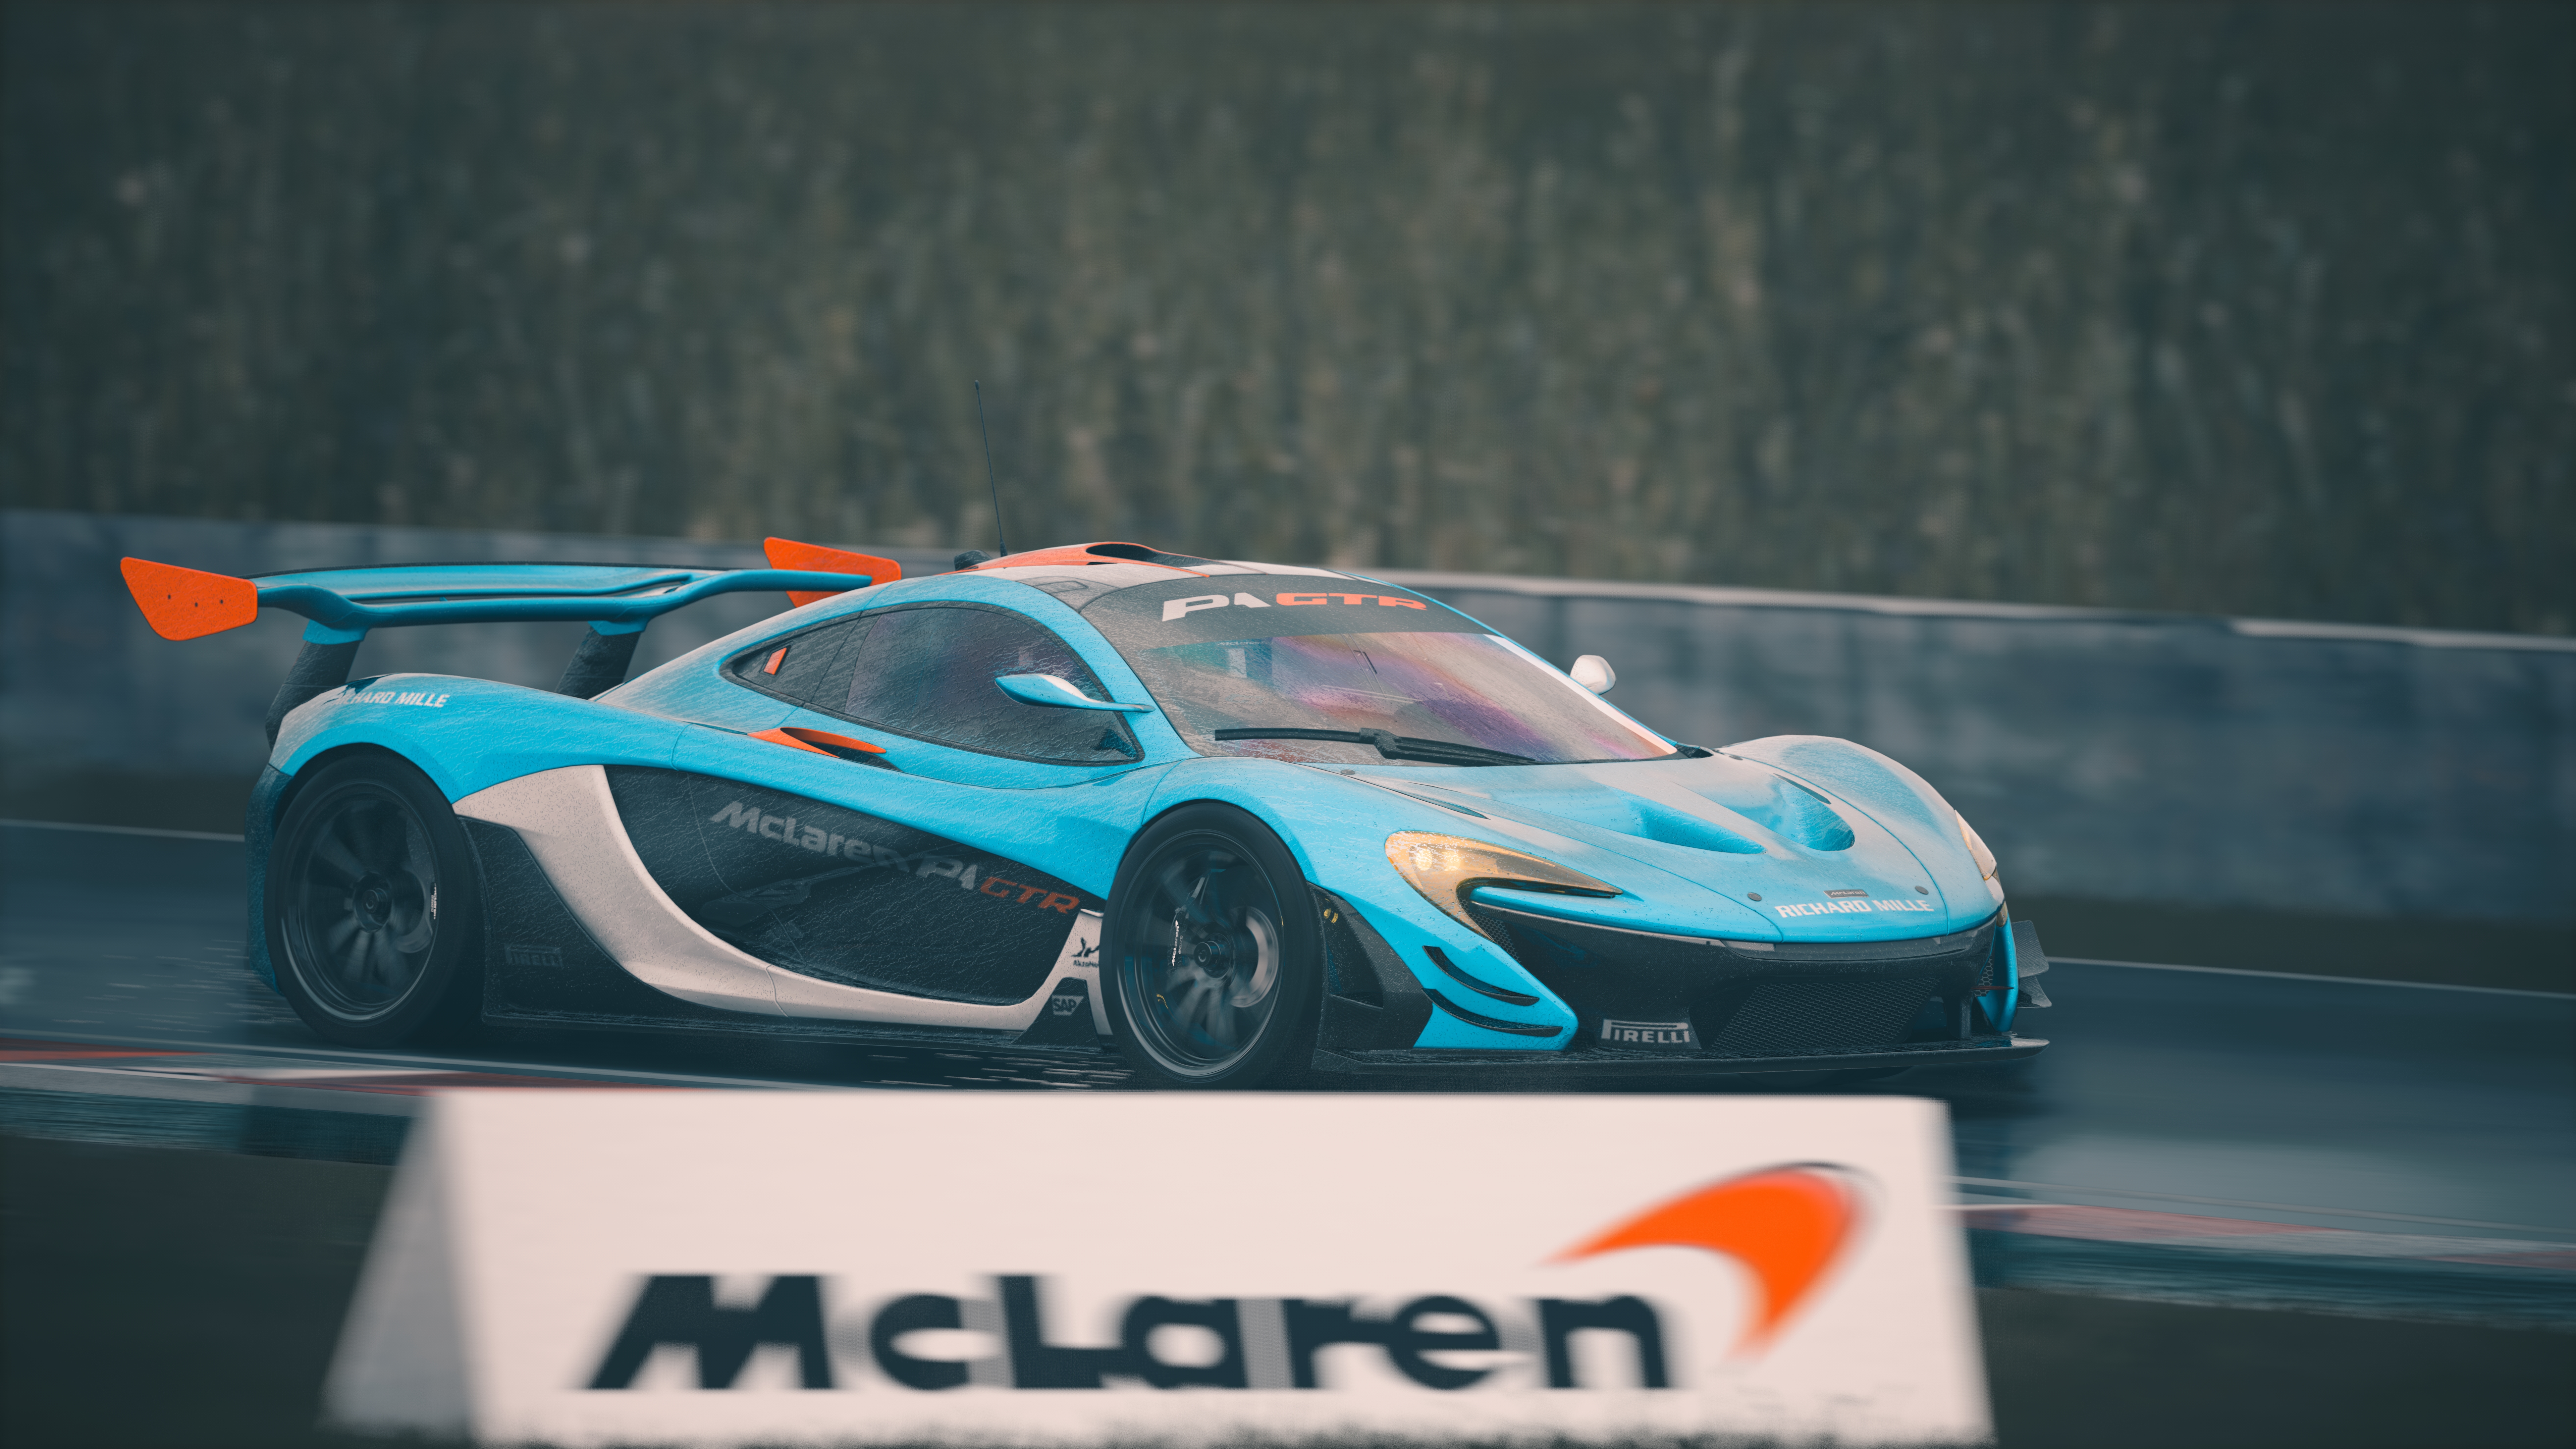 General 7680x4320 McLaren P1 car PC gaming Assetto Corsa frontal view headlights video game art vehicle motion blur blurred video games